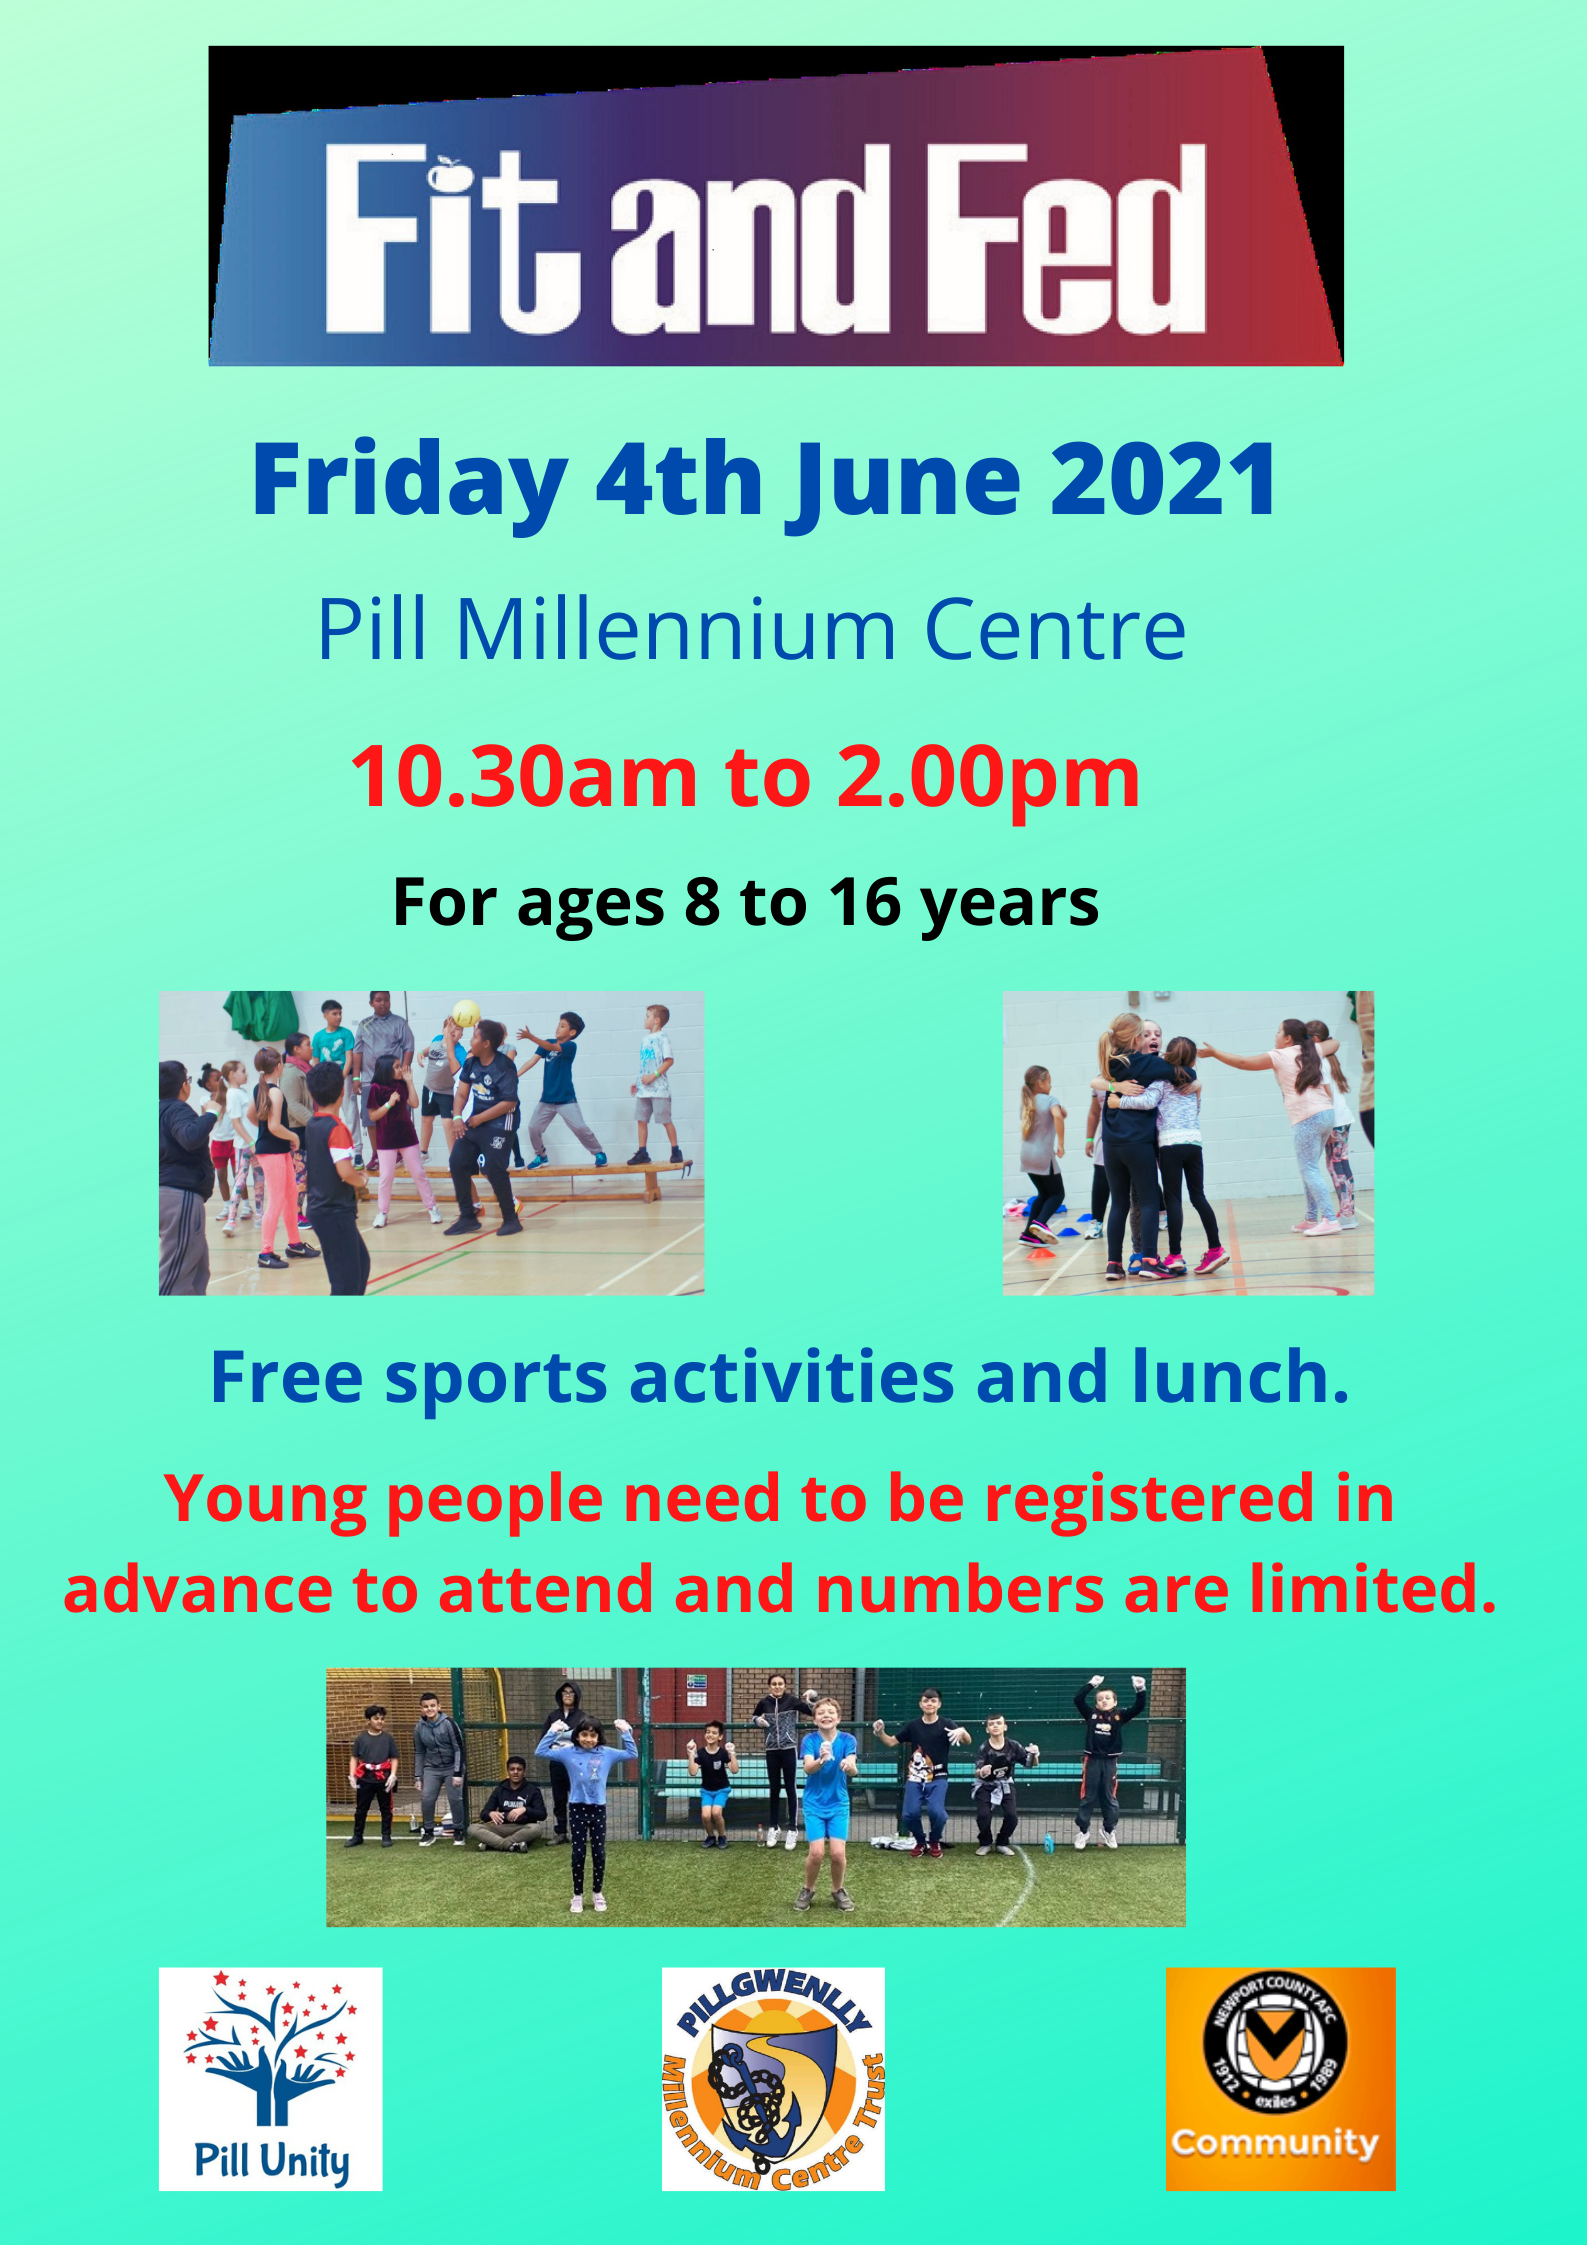 Fit and Fed - Friday 4th June 2021